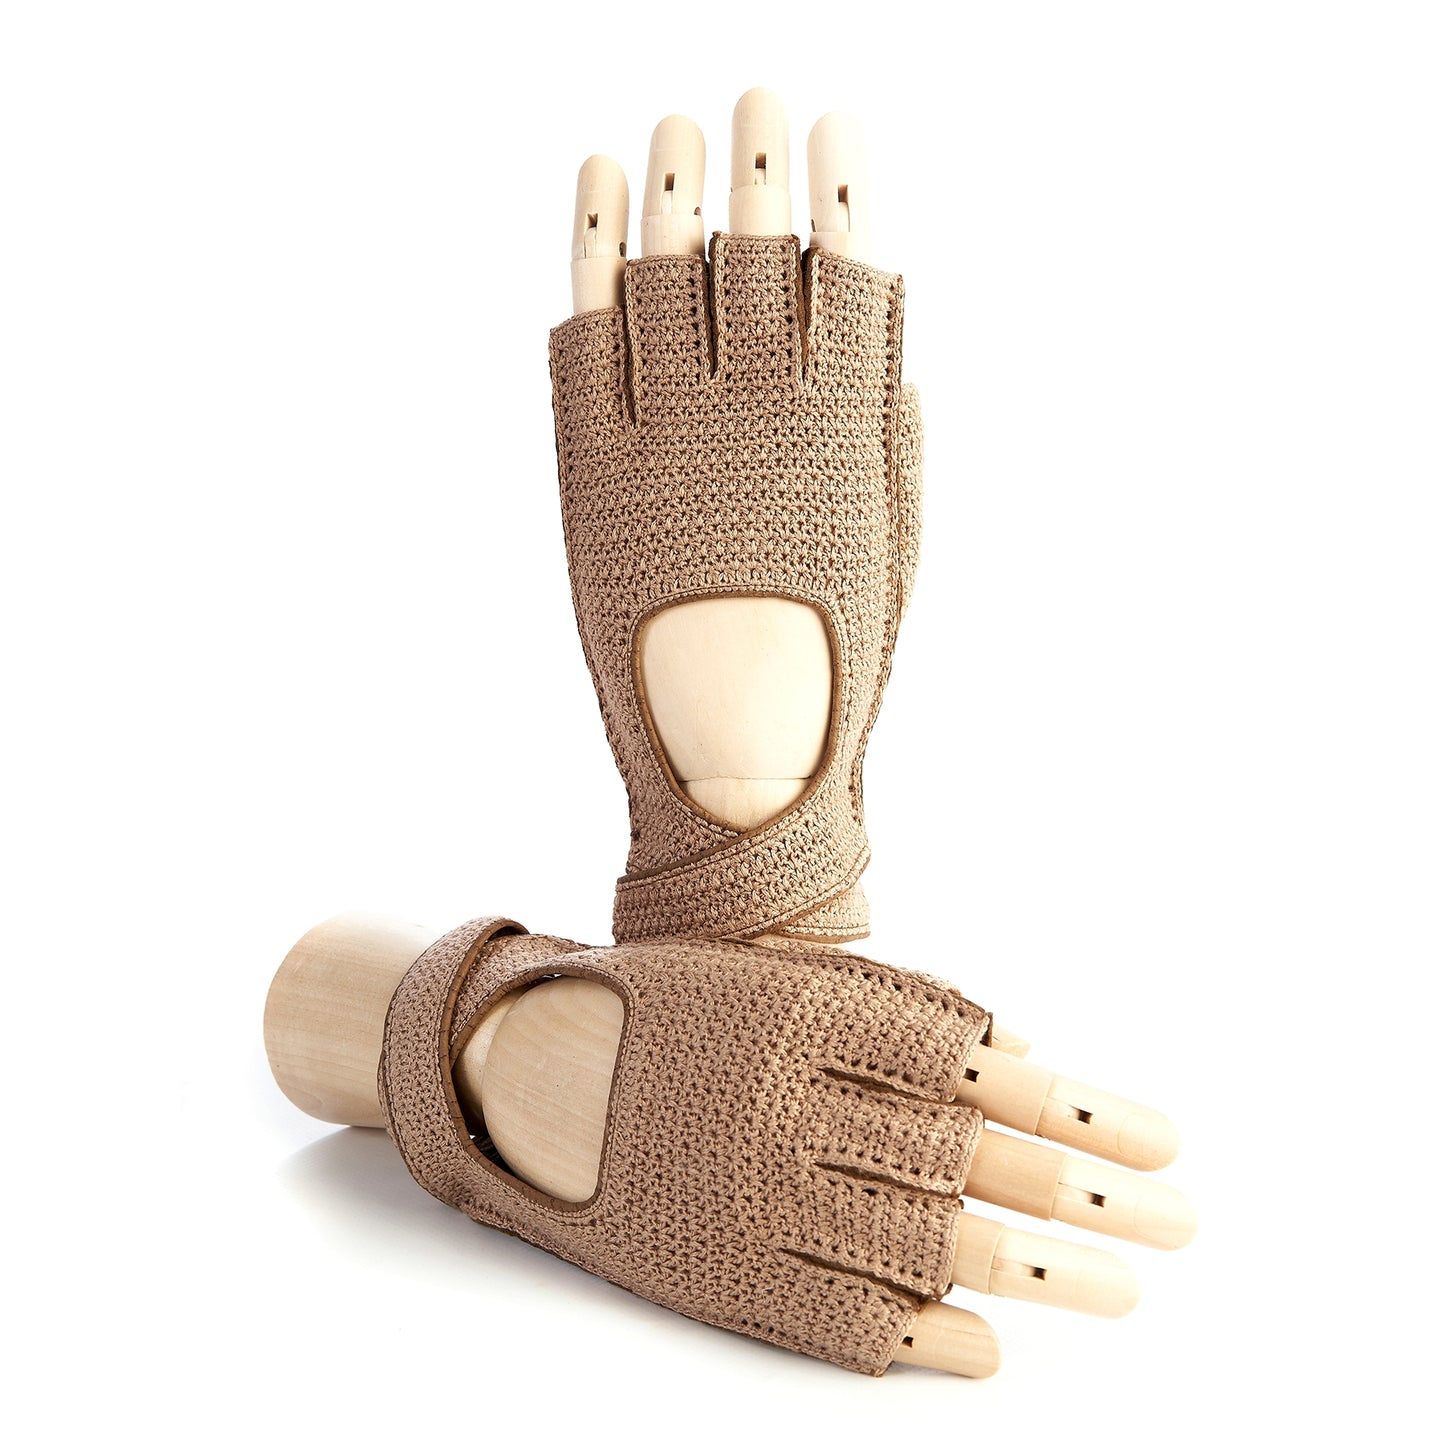 Men's peccary fingerless driving gloves with crochet top and strap detail